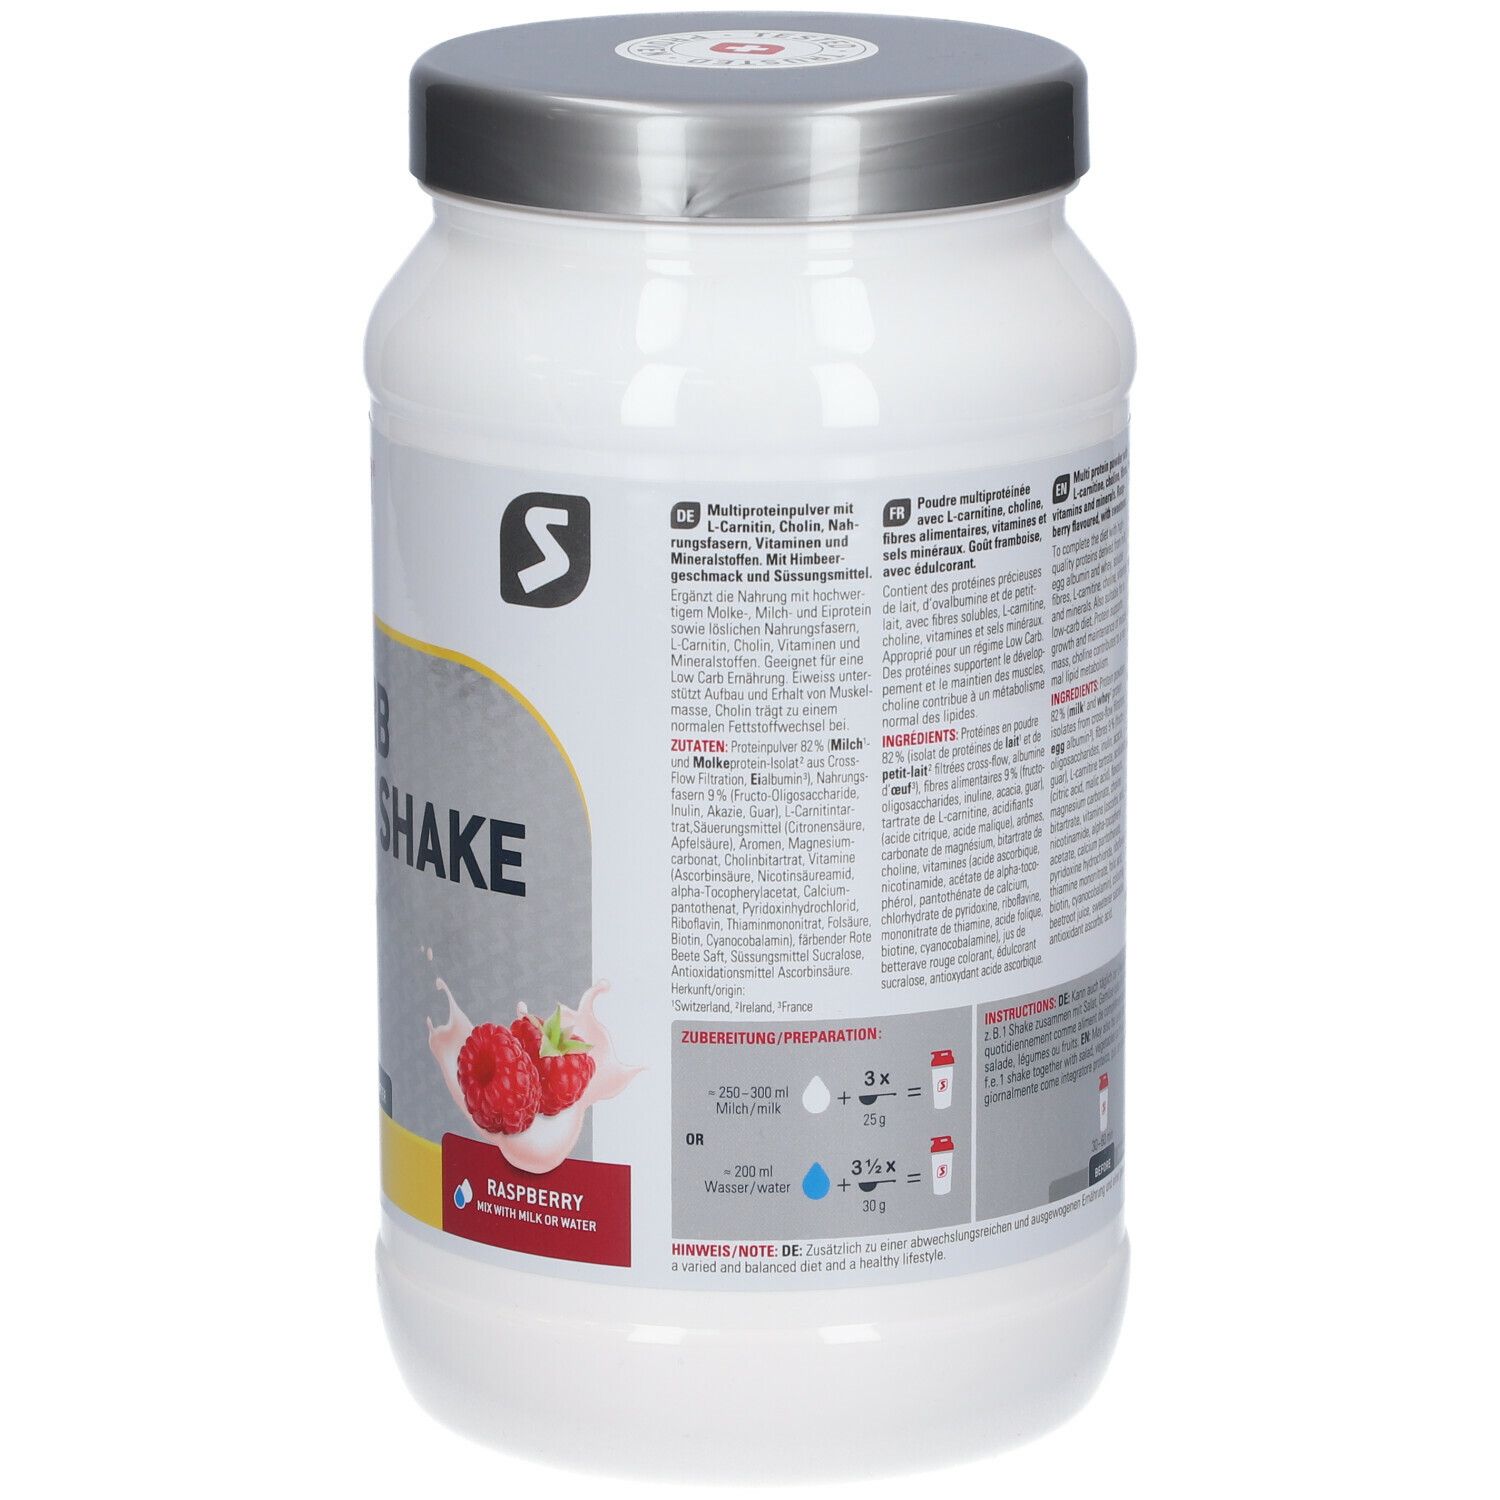 SPONSER® LOW CARB PROTEIN SHAKE, Himbeere